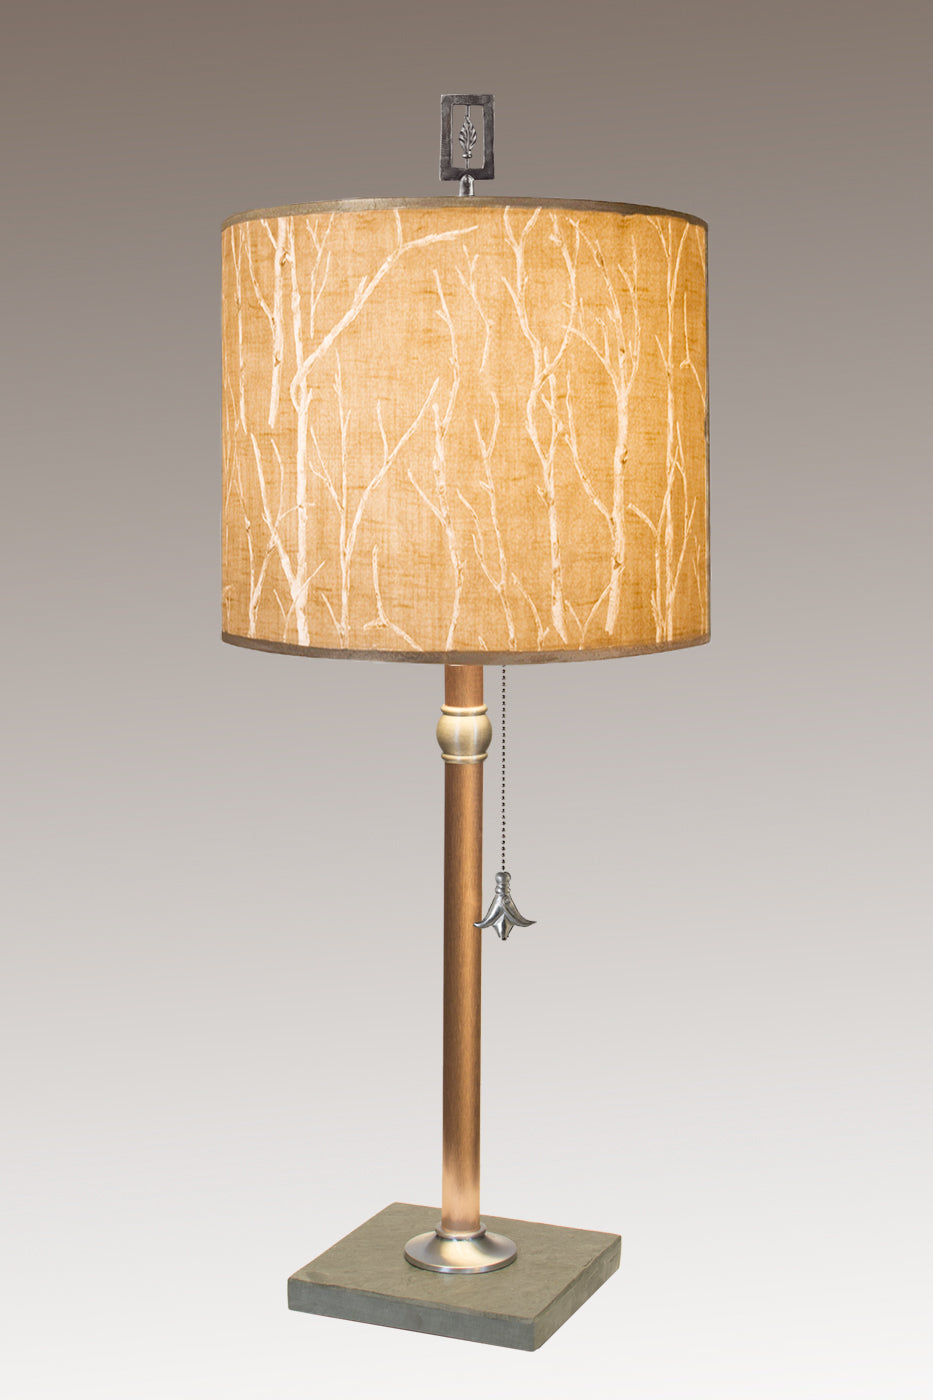 Janna Ugone &amp; Co Table Lamps Copper Table Lamp with Medium Drum Shade in Twigs